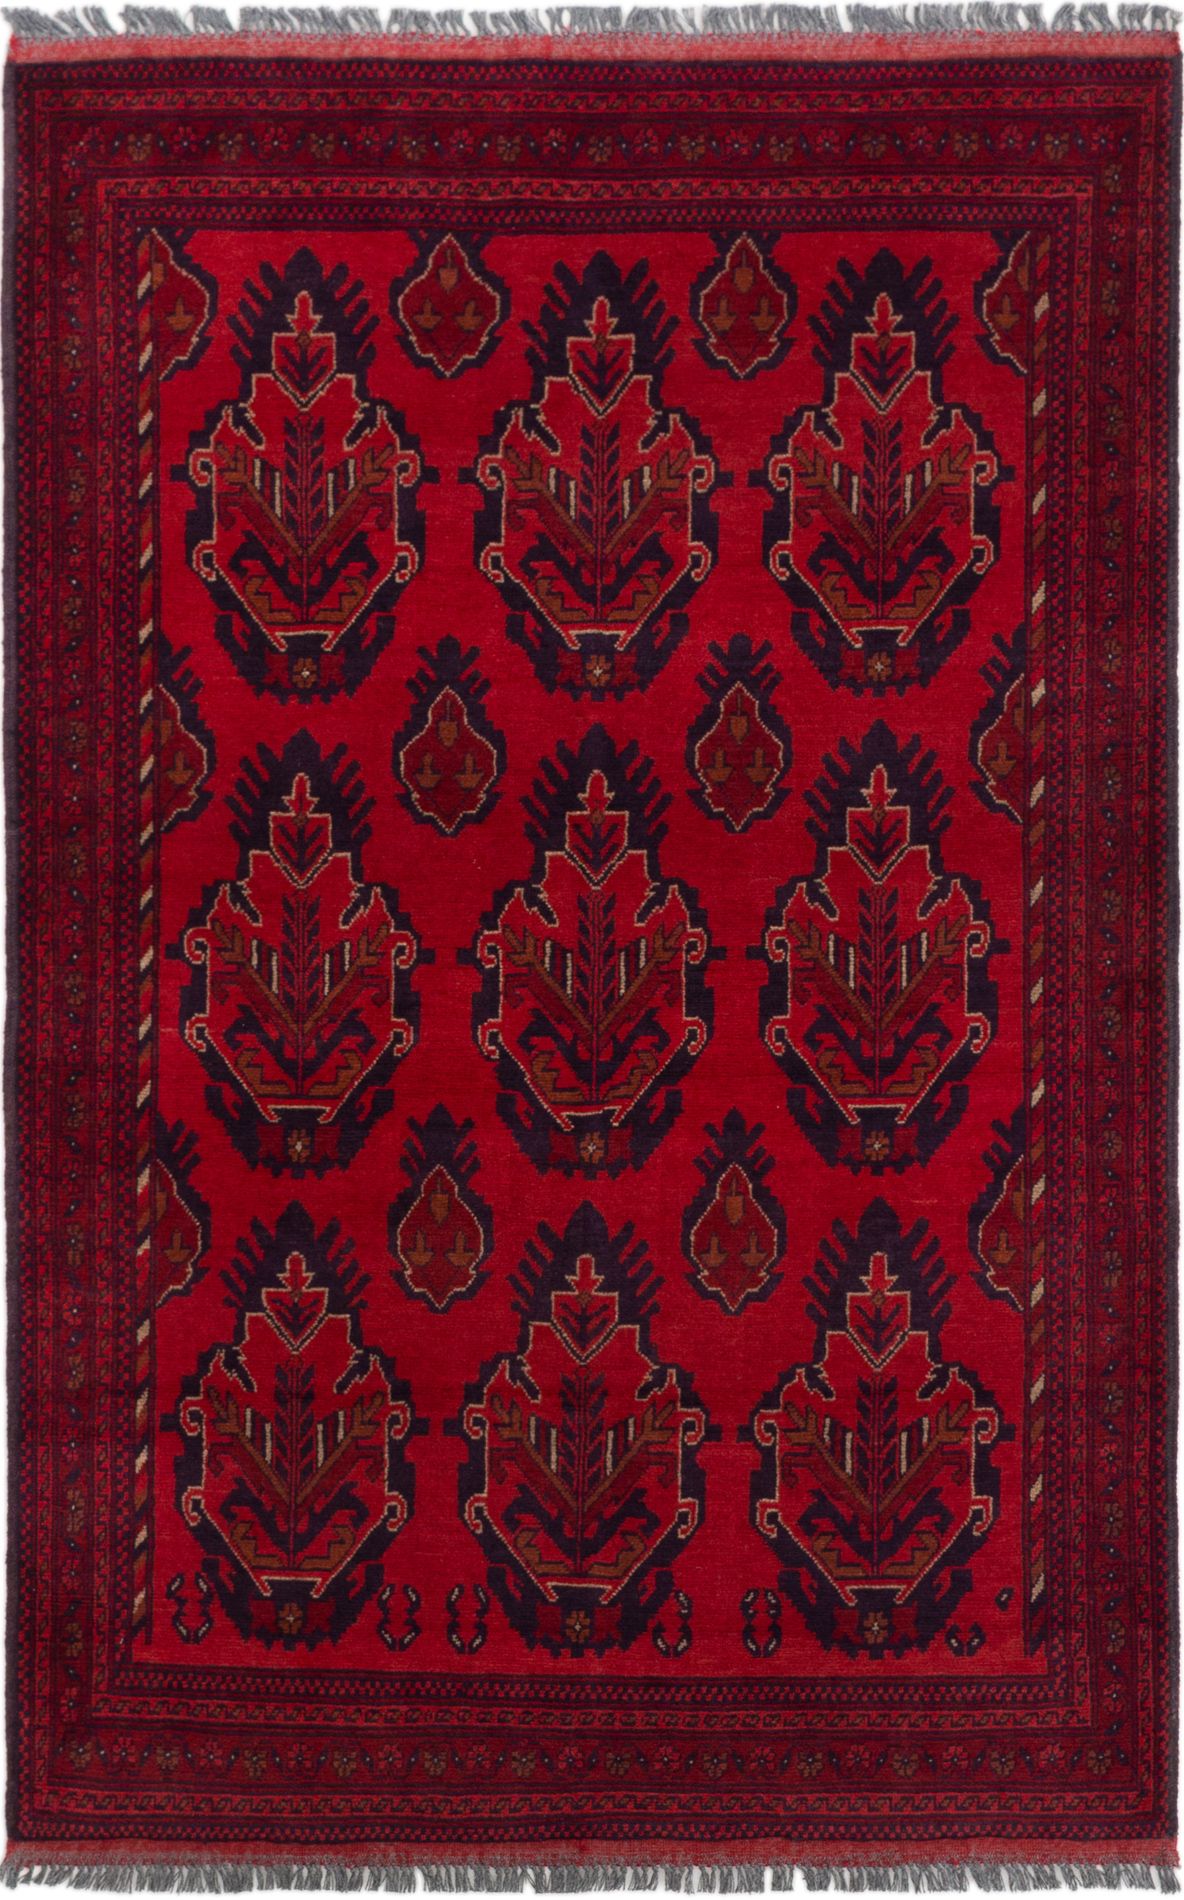 Hand-knotted Finest Khal Mohammadi Red Wool Rug 4'3" x 6'8"  Size: 4'3" x 6'8"  